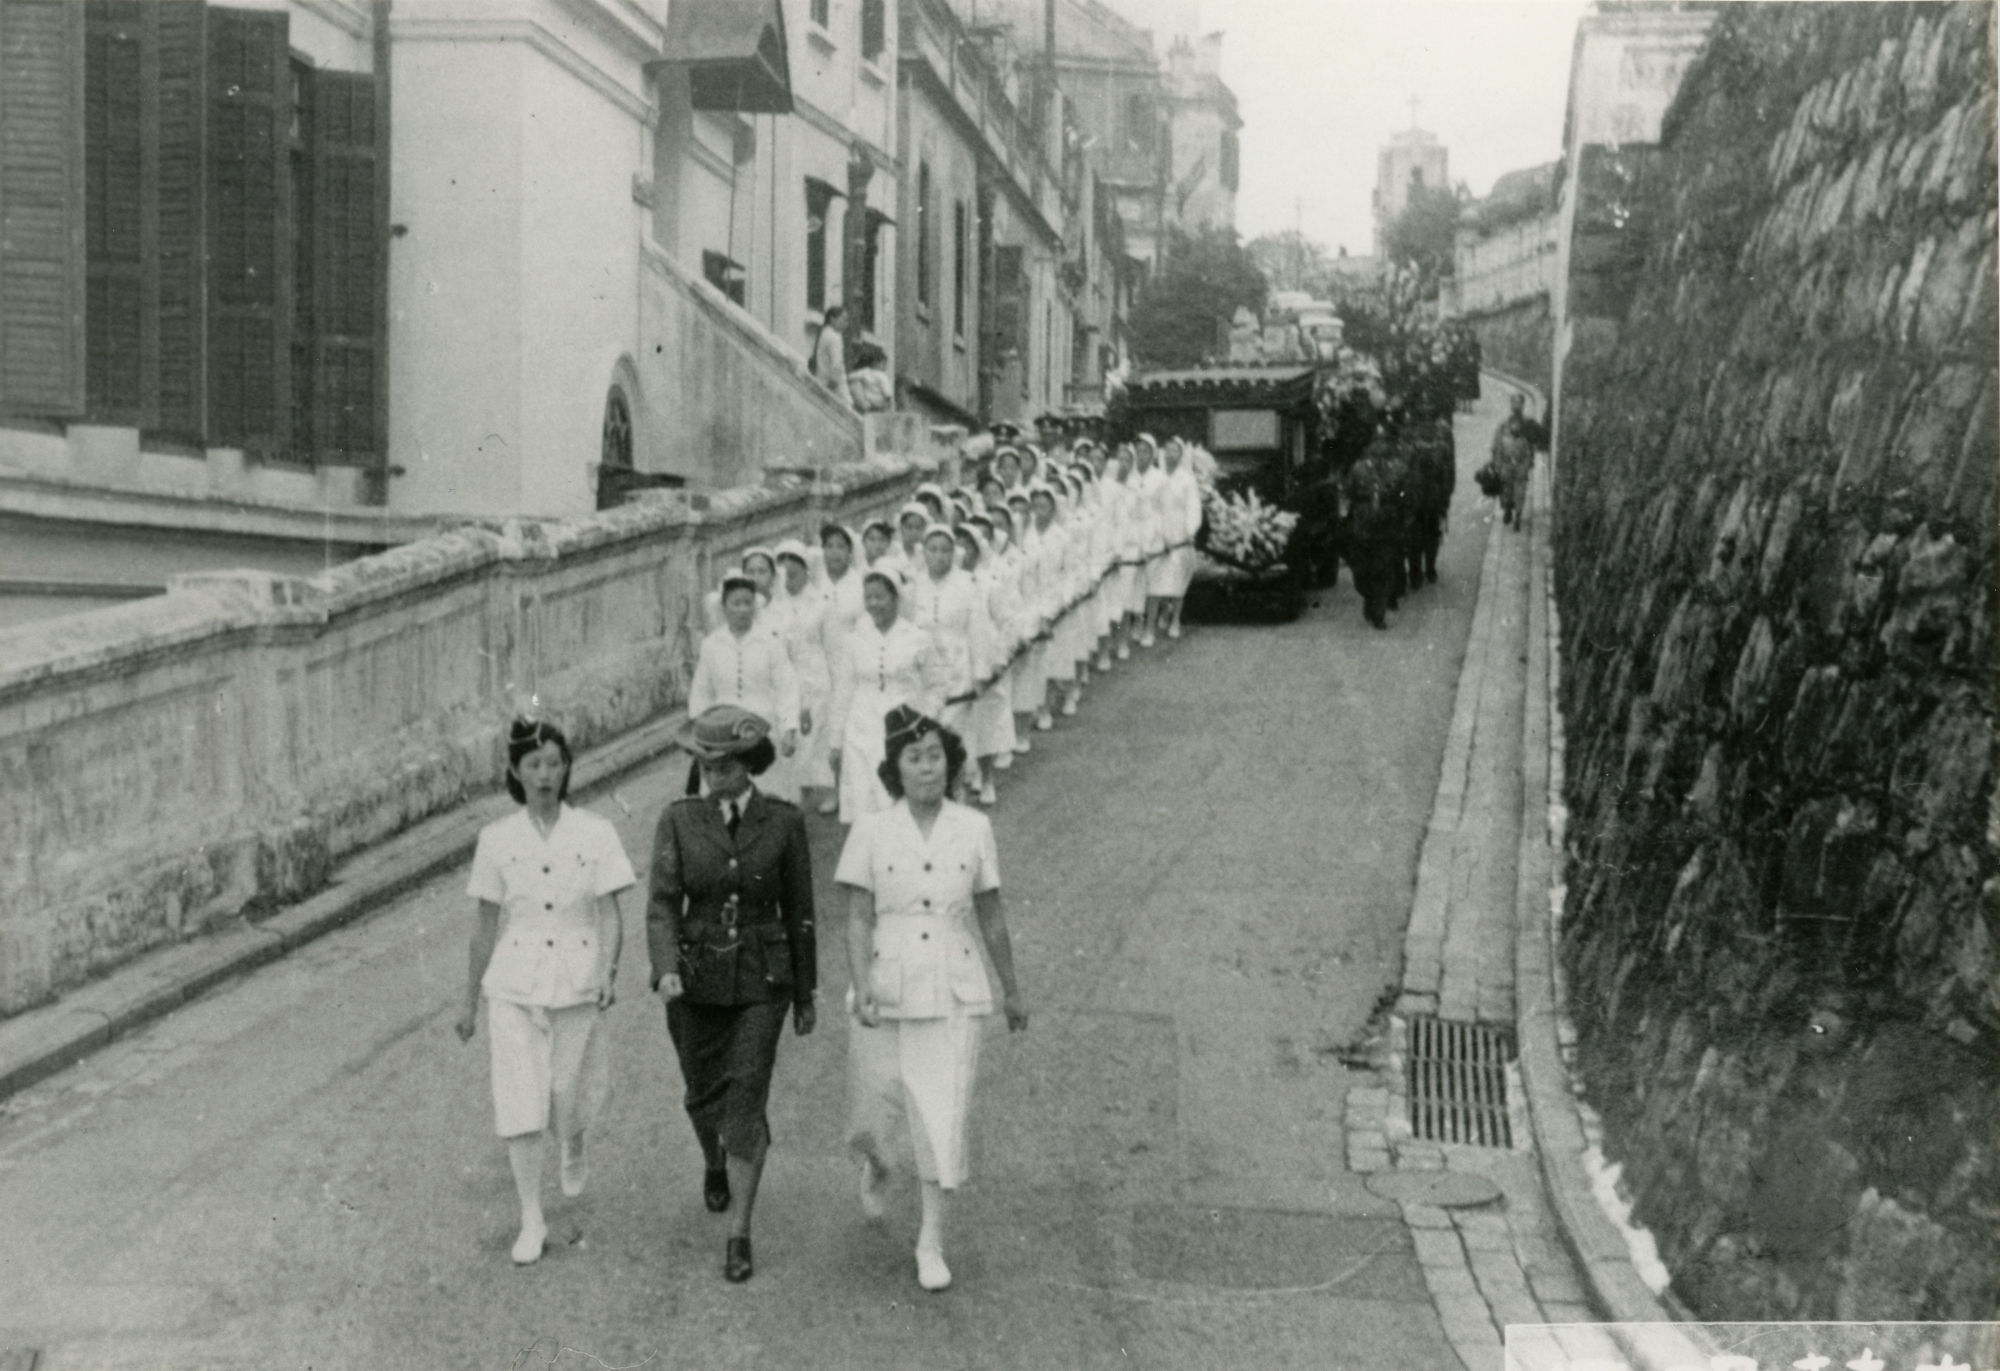 Nurses of the St. John Ambulance Brigade and the hearse move along Seymour Road. In 1915, Ho Kom-tong initiated the founding of the St. John Ambulance Brigade in Hong Kong. With funds donated by Ho, the Brigade was established in the following year.